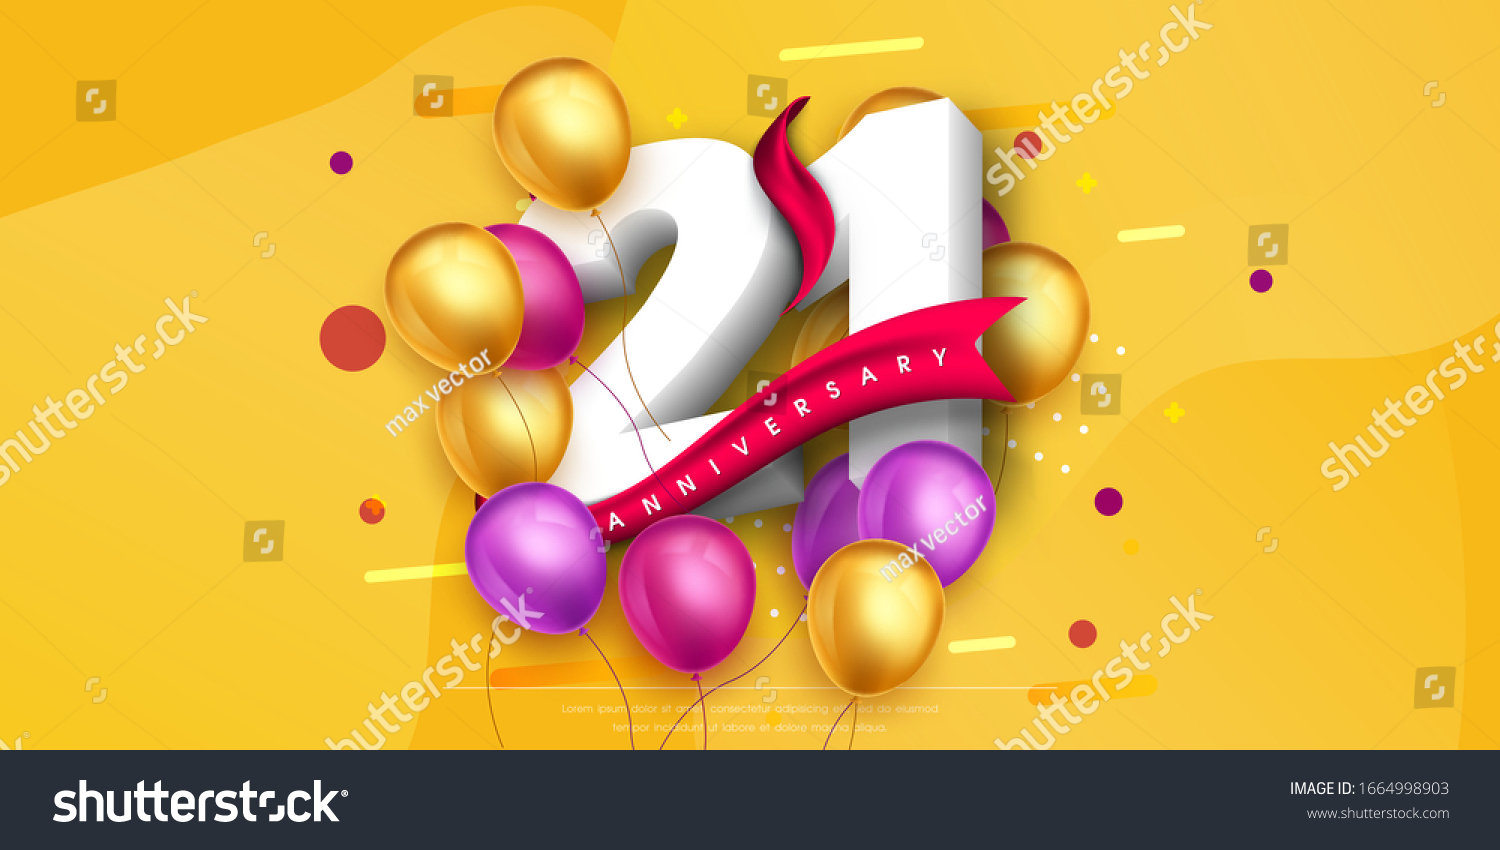 SVG of 21 years anniversary logo template design on yellow background and balloons. 21st anniversary celebration background with red ribbon and balloons. Party poster, brochure template. Vector illustration. svg